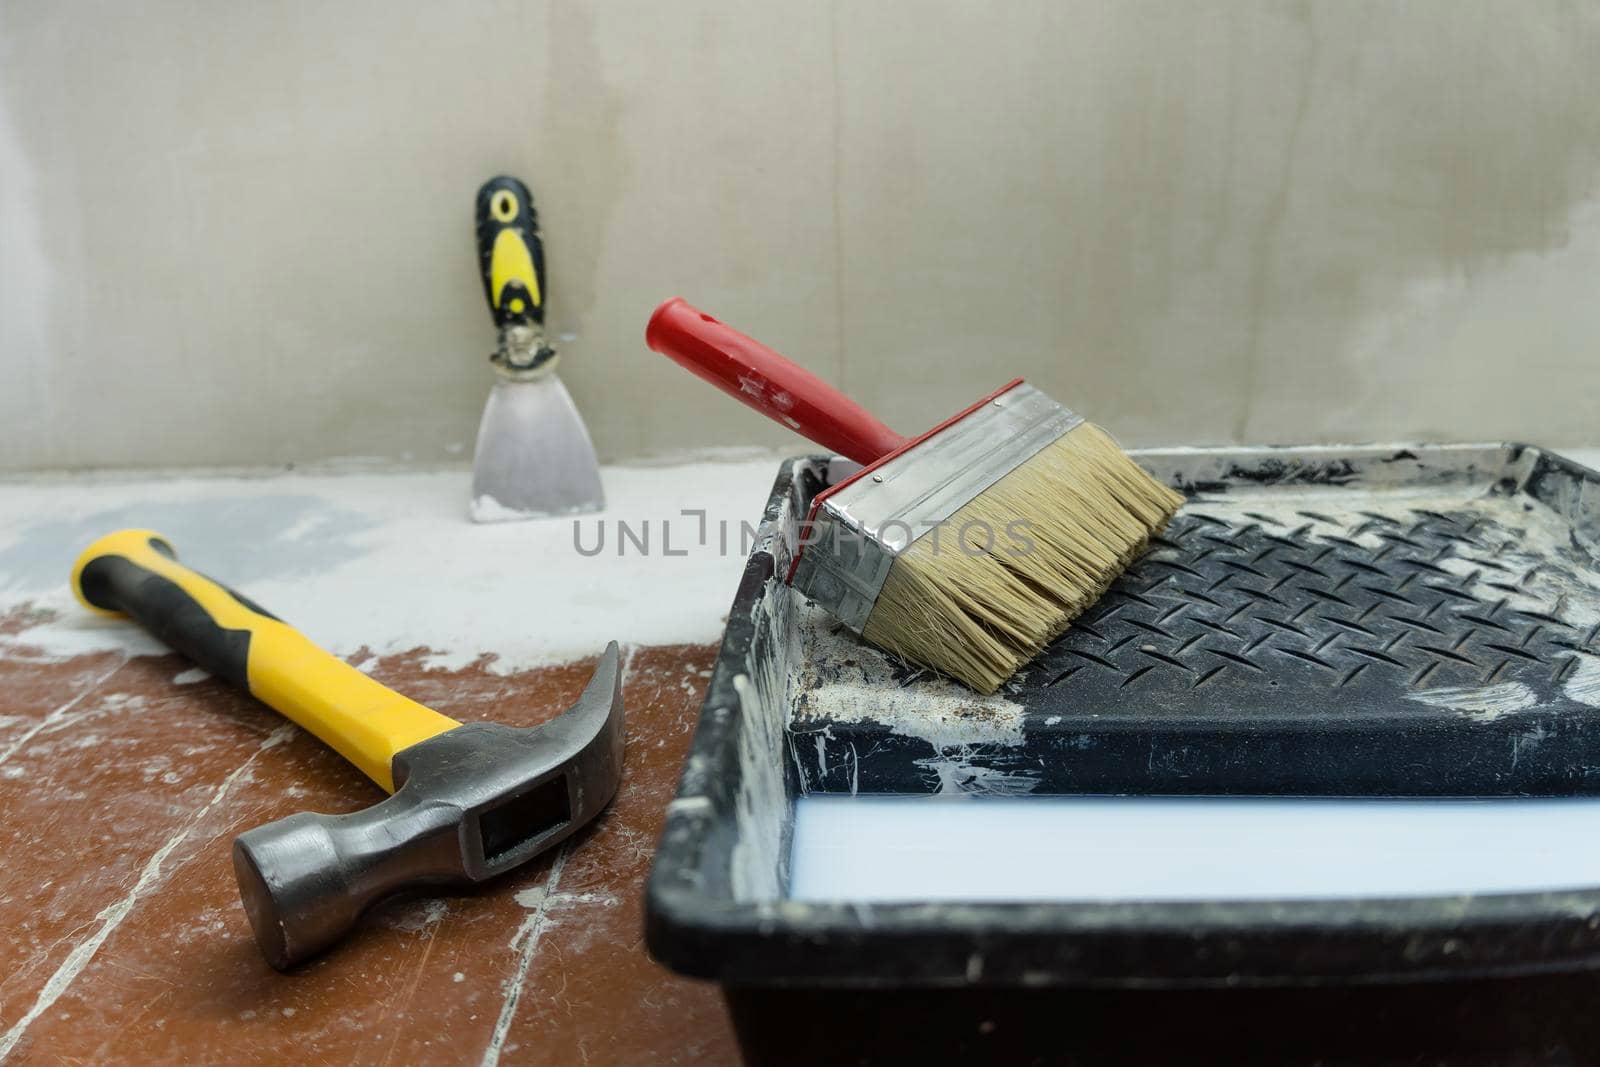 Construction and painting tools lie on the floor during the repair and restoration of the house.Work as a Builder or handyman in the house.Finishing or repairing a room.Job of repairing the apartment